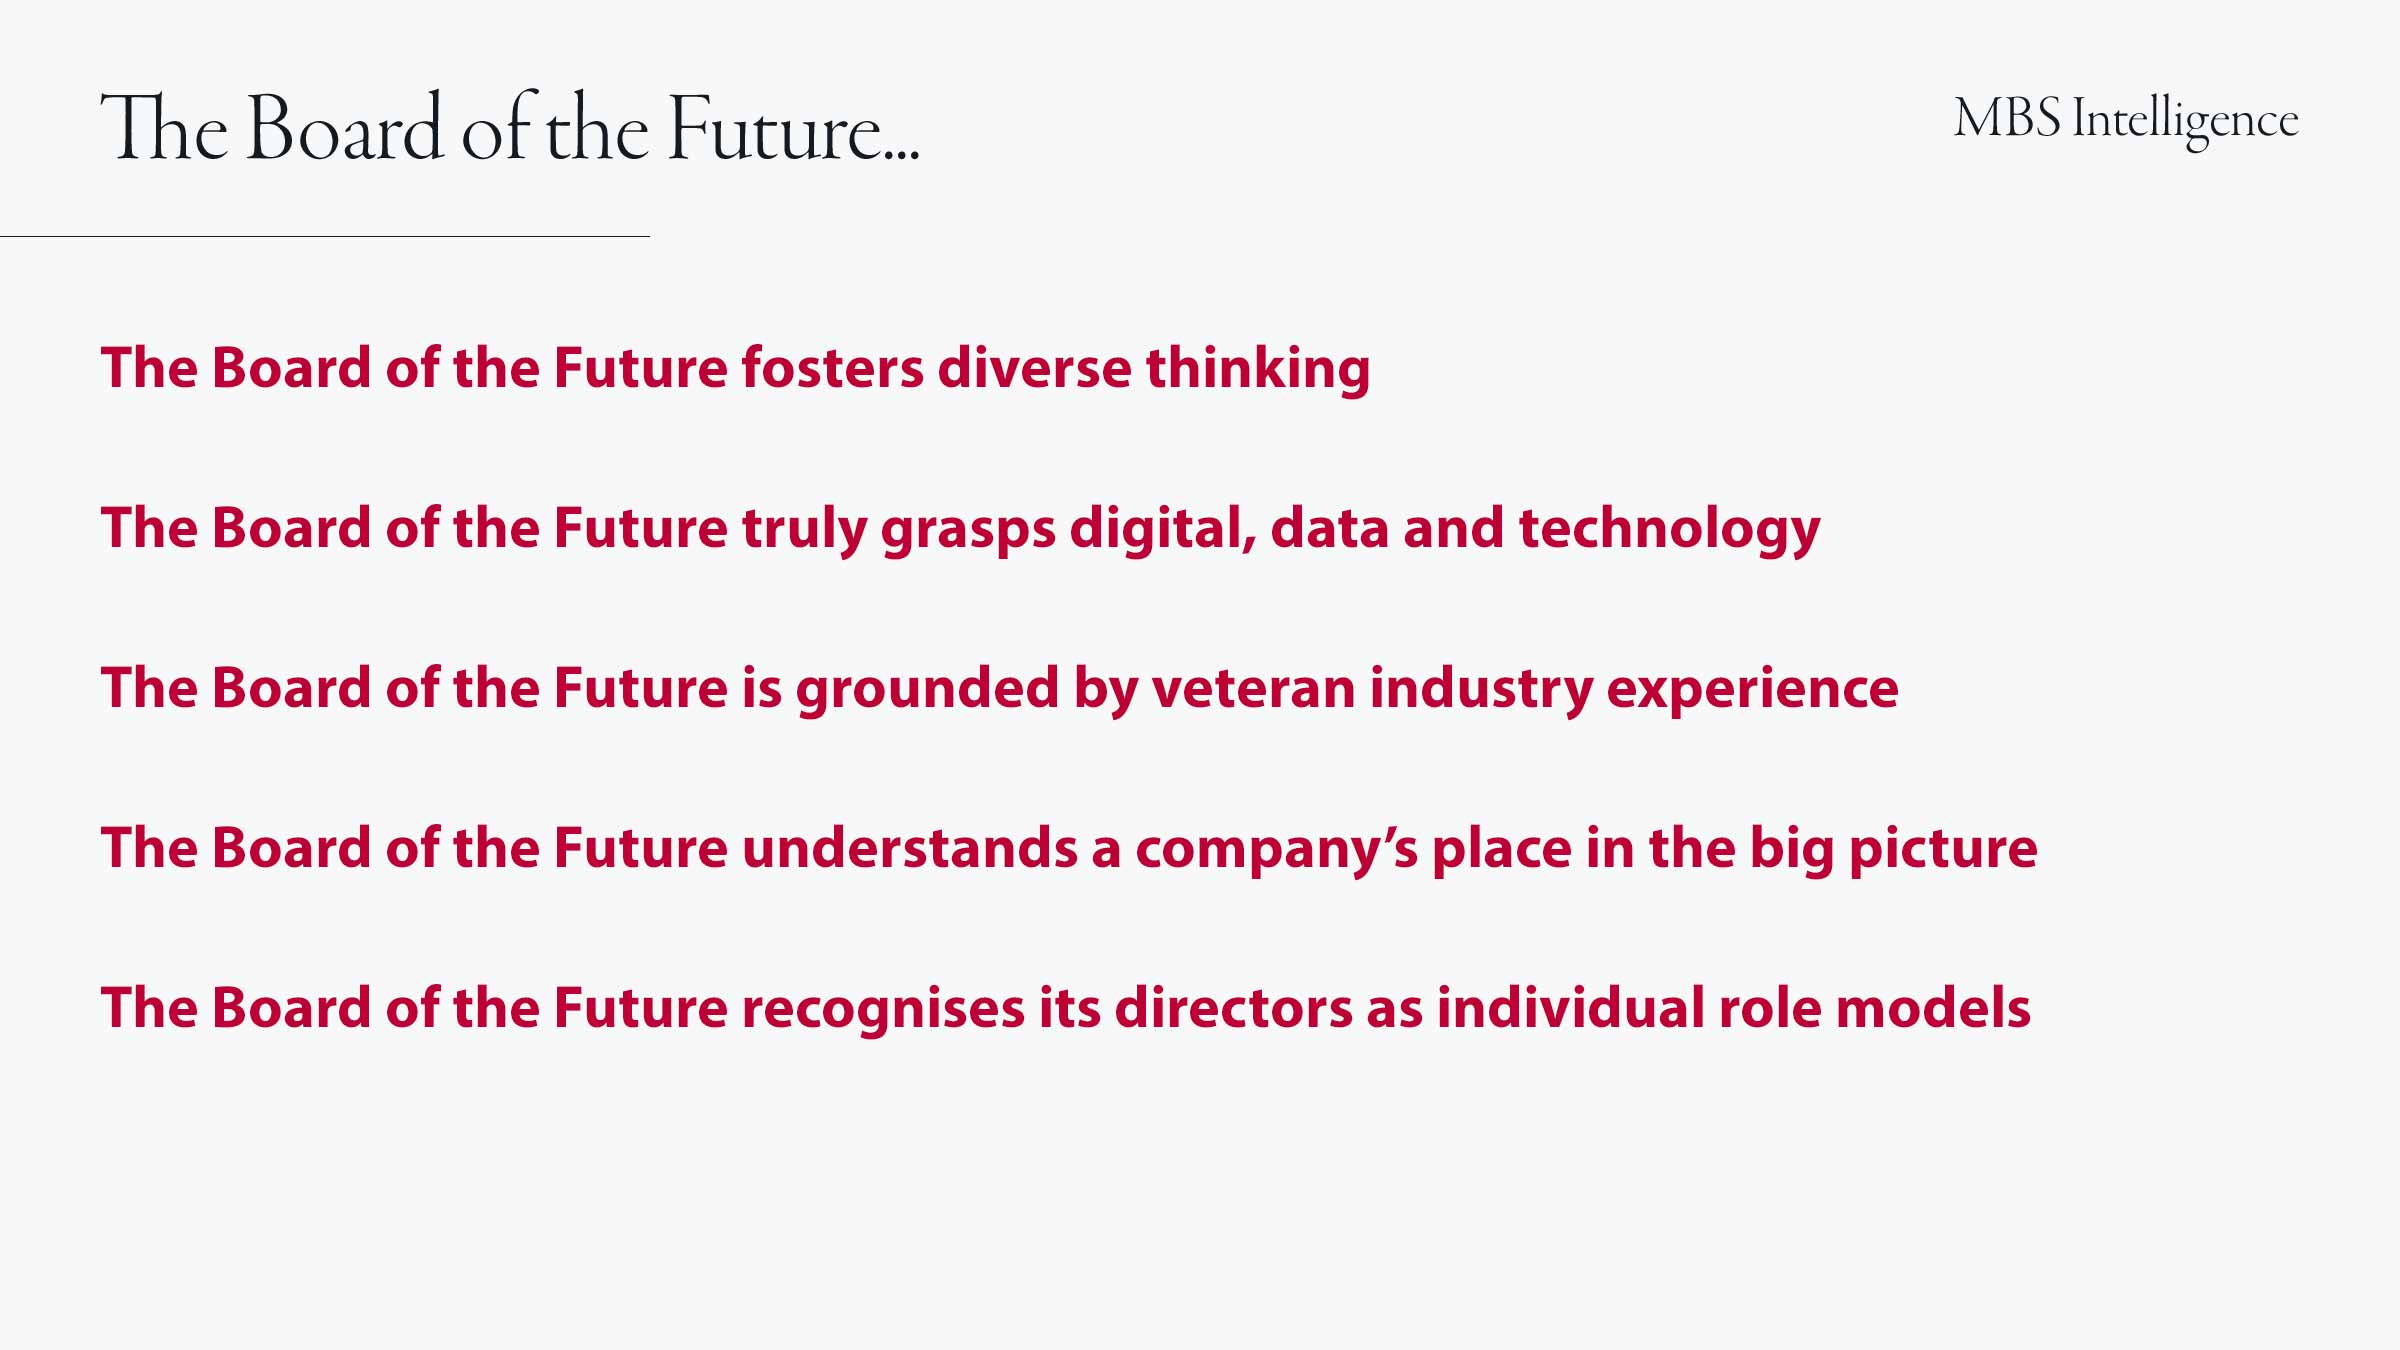 The board of the future fosters diverse thinking; The board of the future truly grasps digital, data and technology; The board of the future is grounded by veteran industry experience; The board of the future understands a company’s place in the big picture; The board of the future recognises its directors as individual role models.